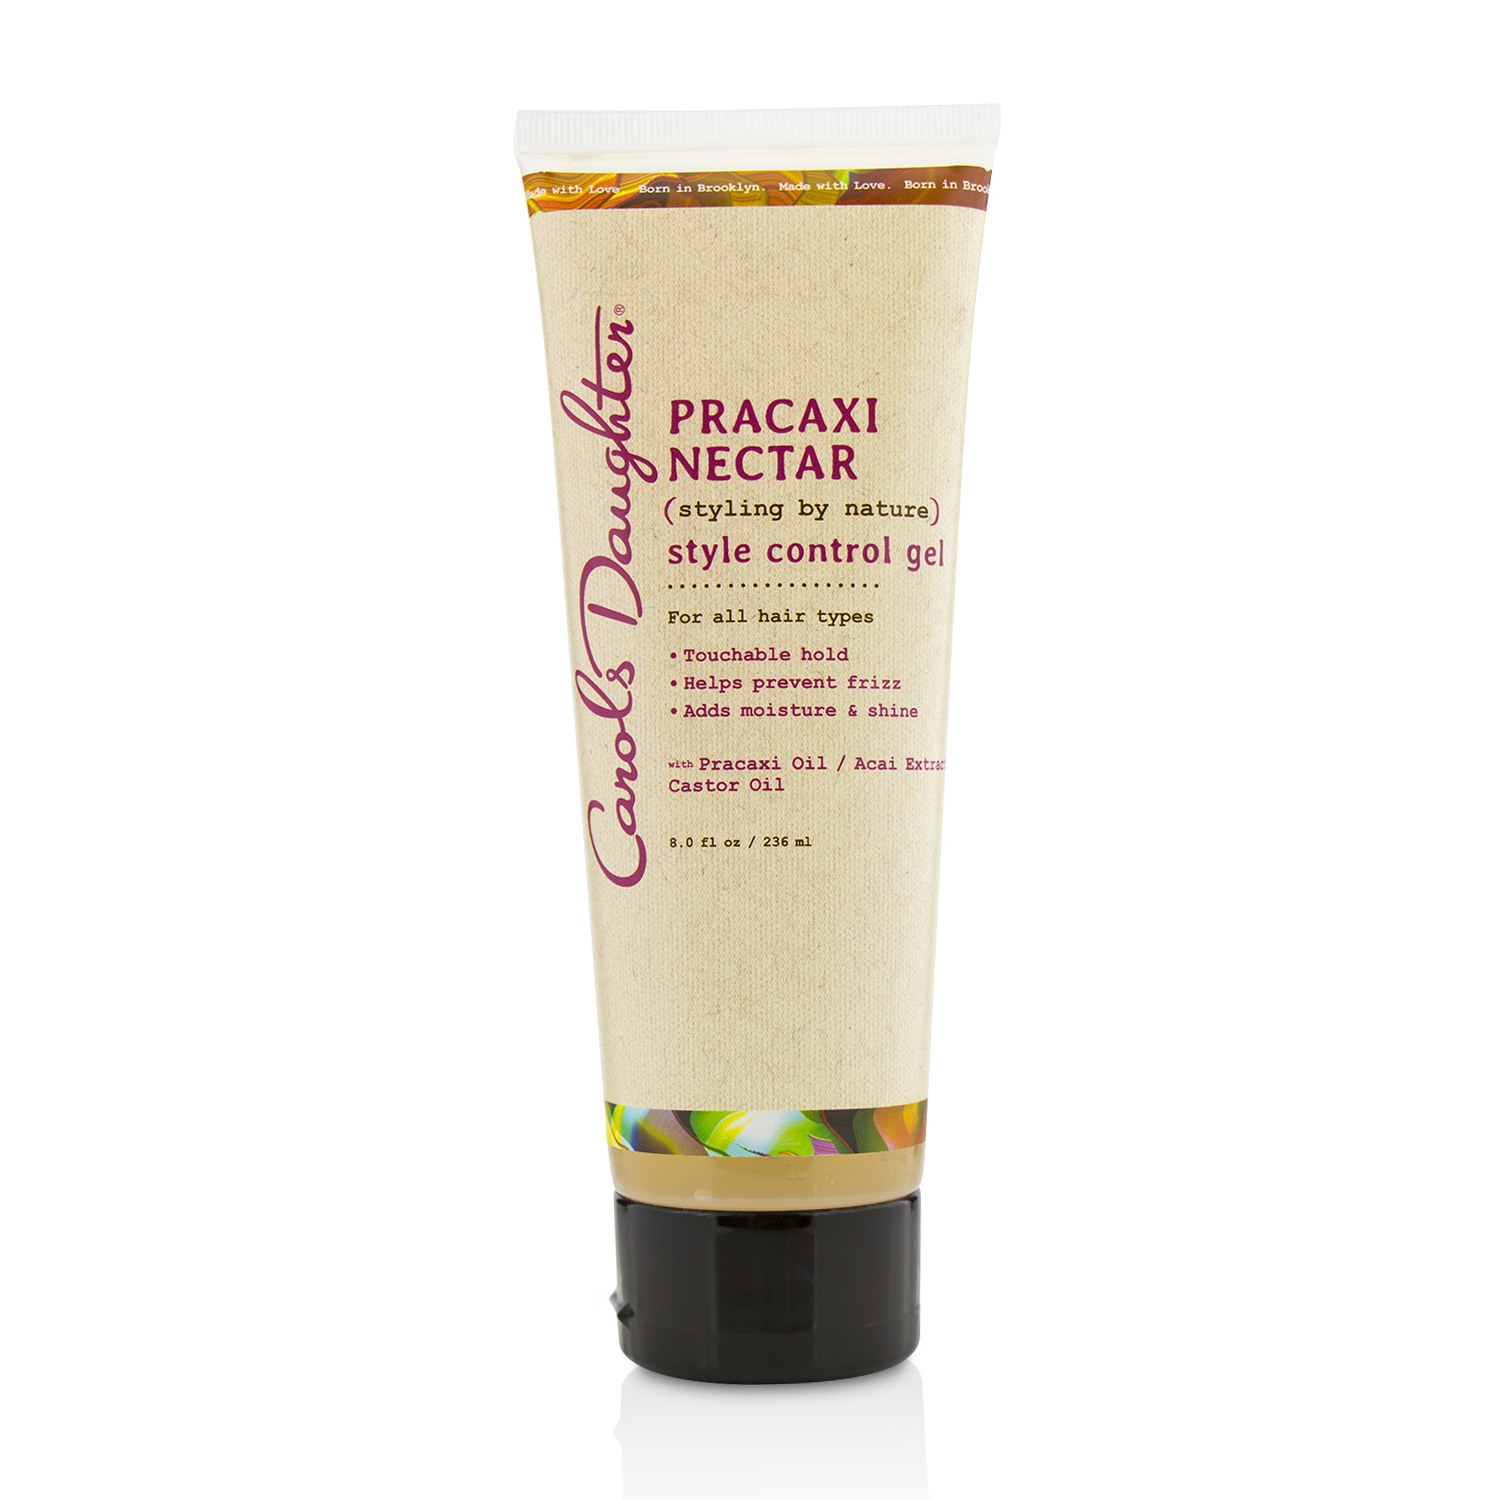 Pracaxi Nectar Style Control Gel (For All Hair Types) Carols Daughter Image